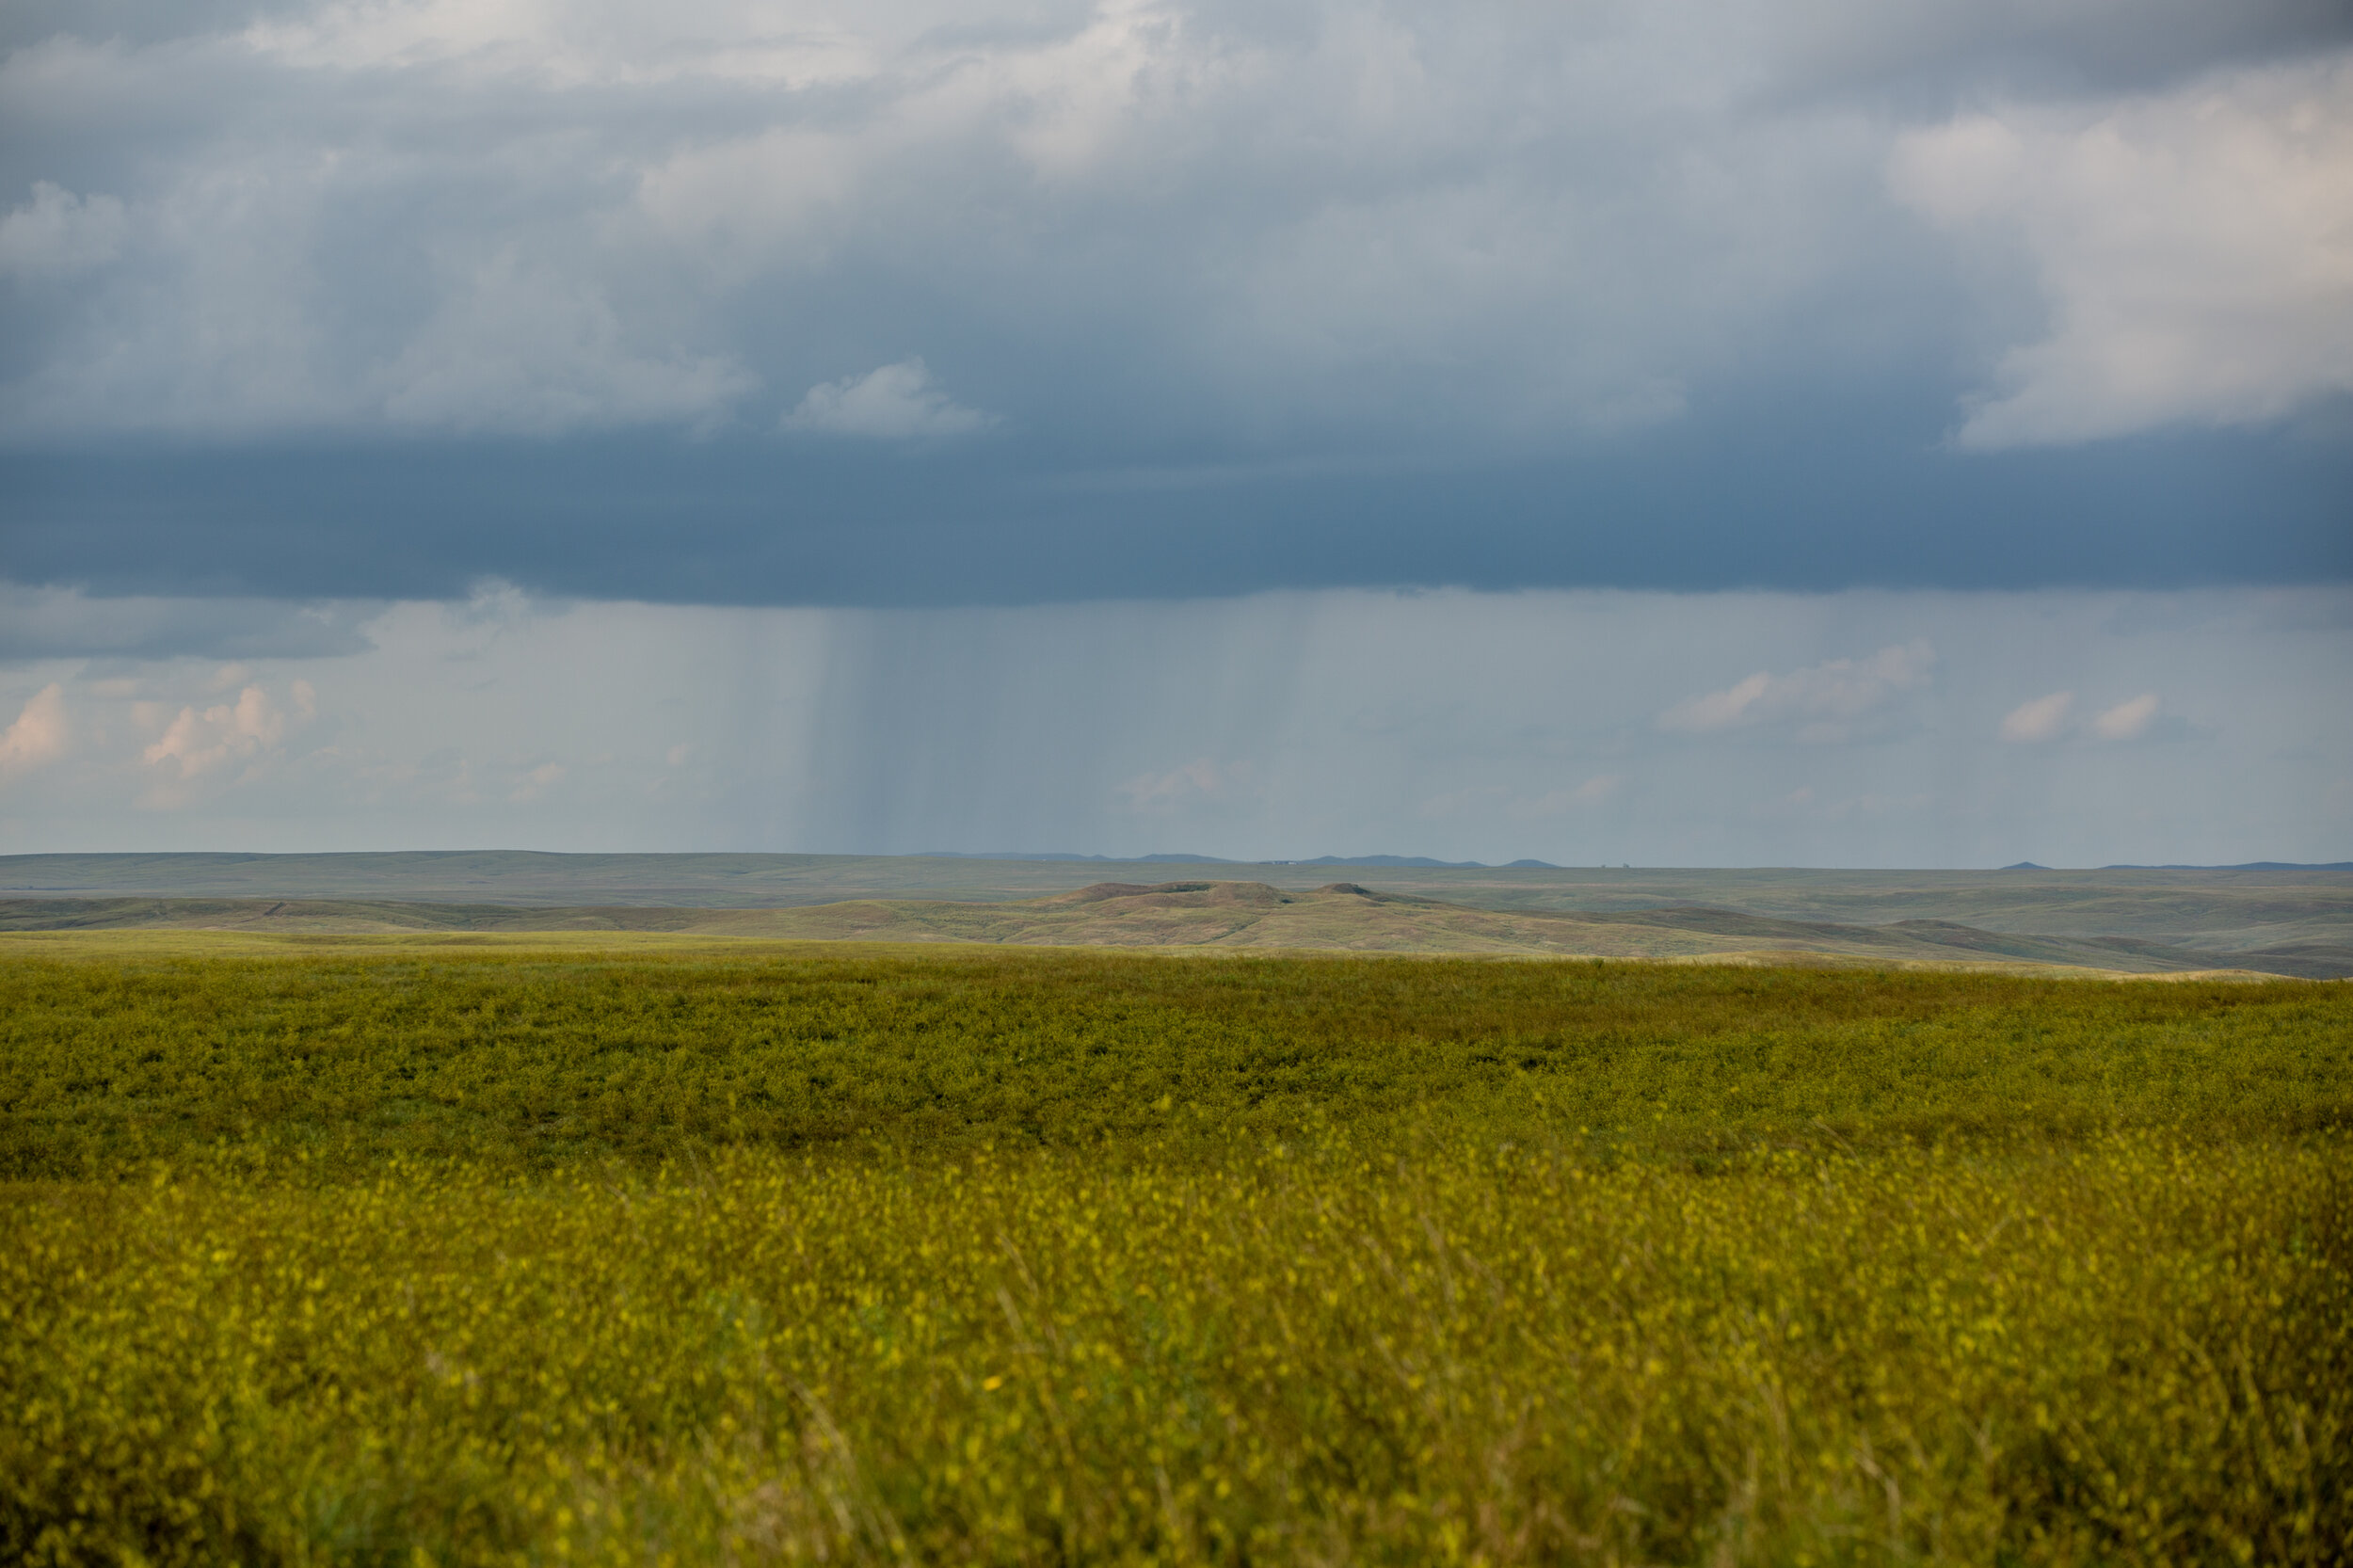 Rain Showers over Scatter Butte on the DX Ranch, Scatter Butte holds sacred meaning for my Lakota Sioux ancesters and it is where we spread my grandfather's ashes.jpg